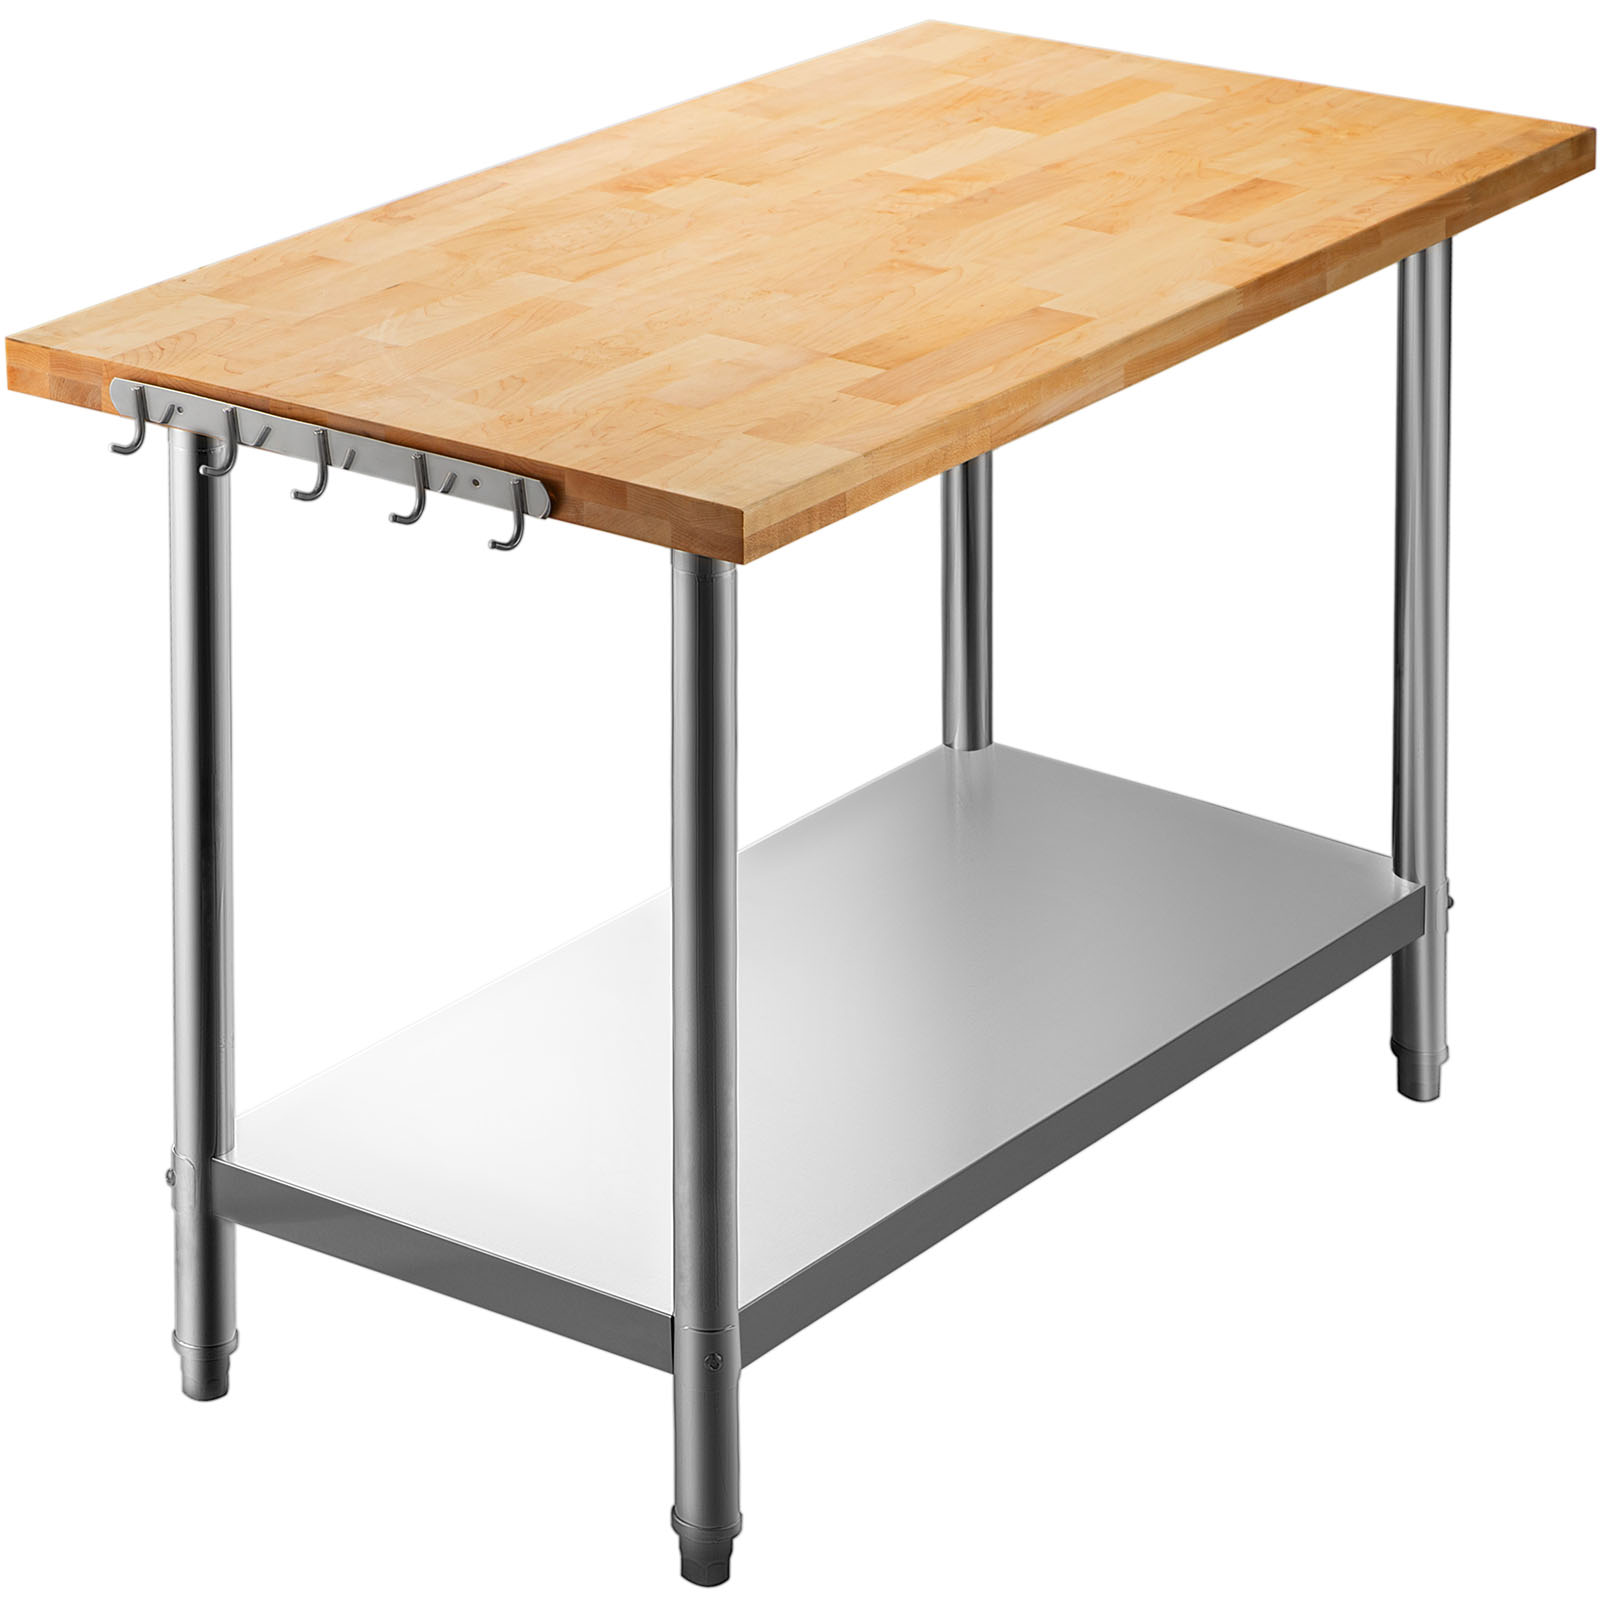 Vevor Maple Top Work Table Kitchen Prep Table Wood 36 X 24 In Stainless Steel от Vevor Many GEOs